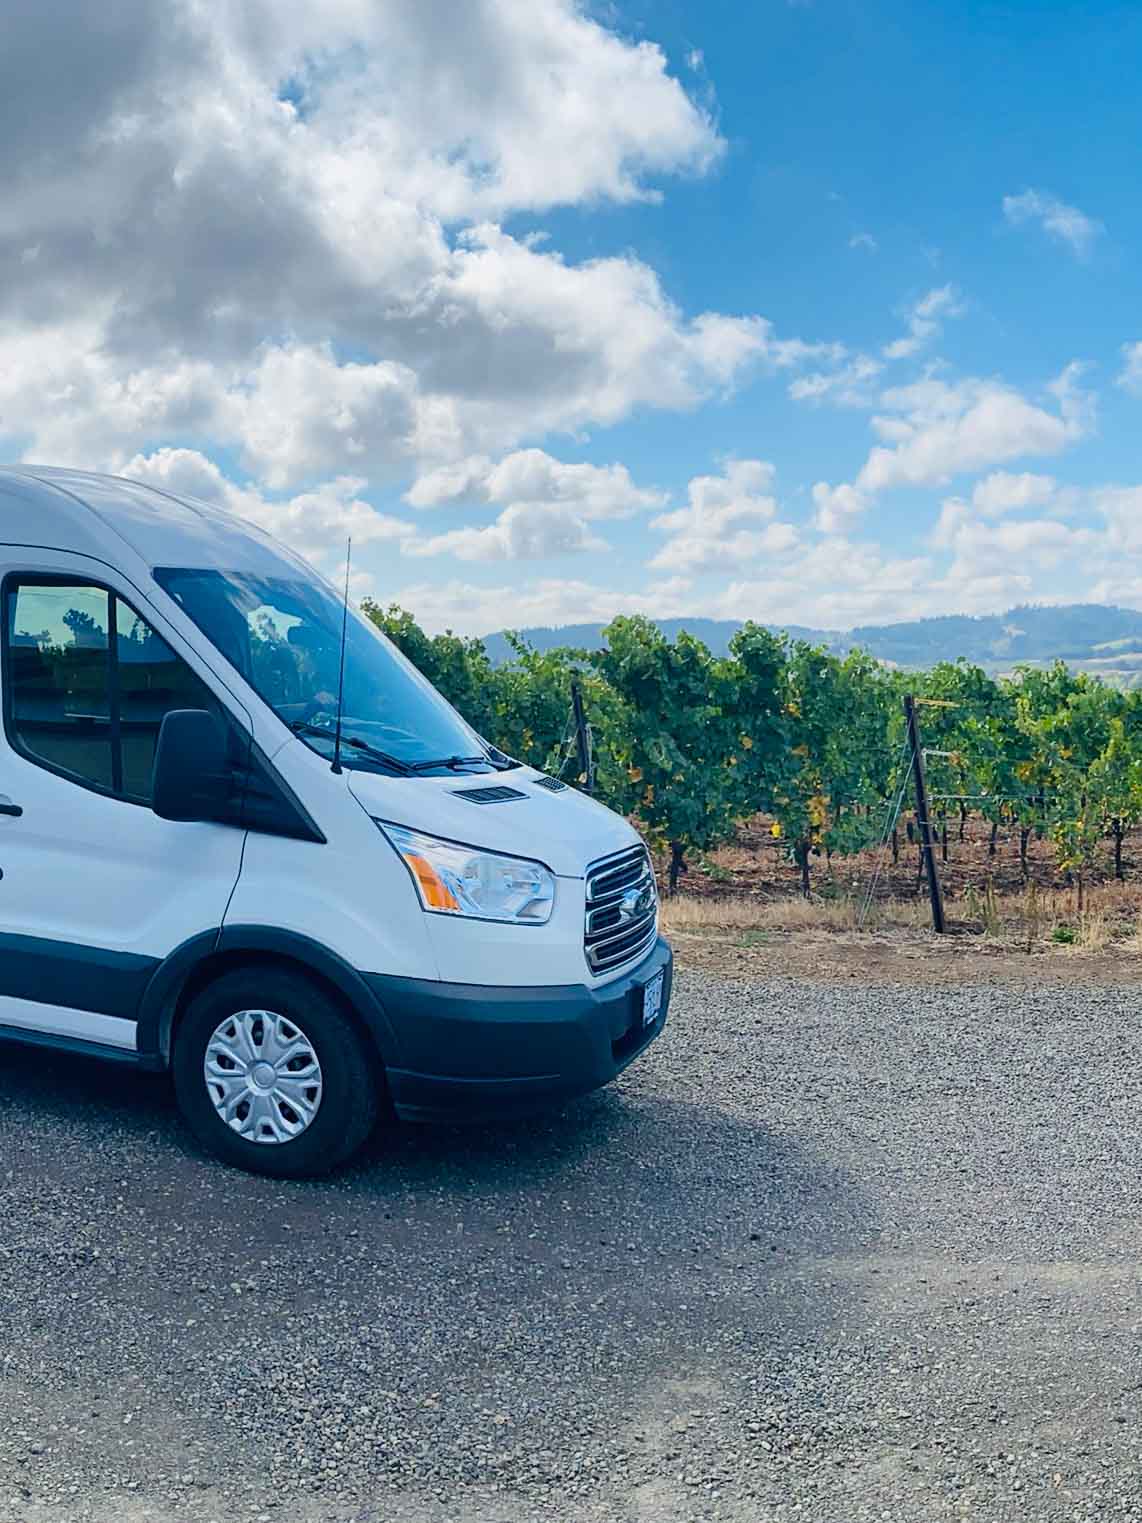 NW Wine Shuttle Hop on Hop off Wine Tour 2022